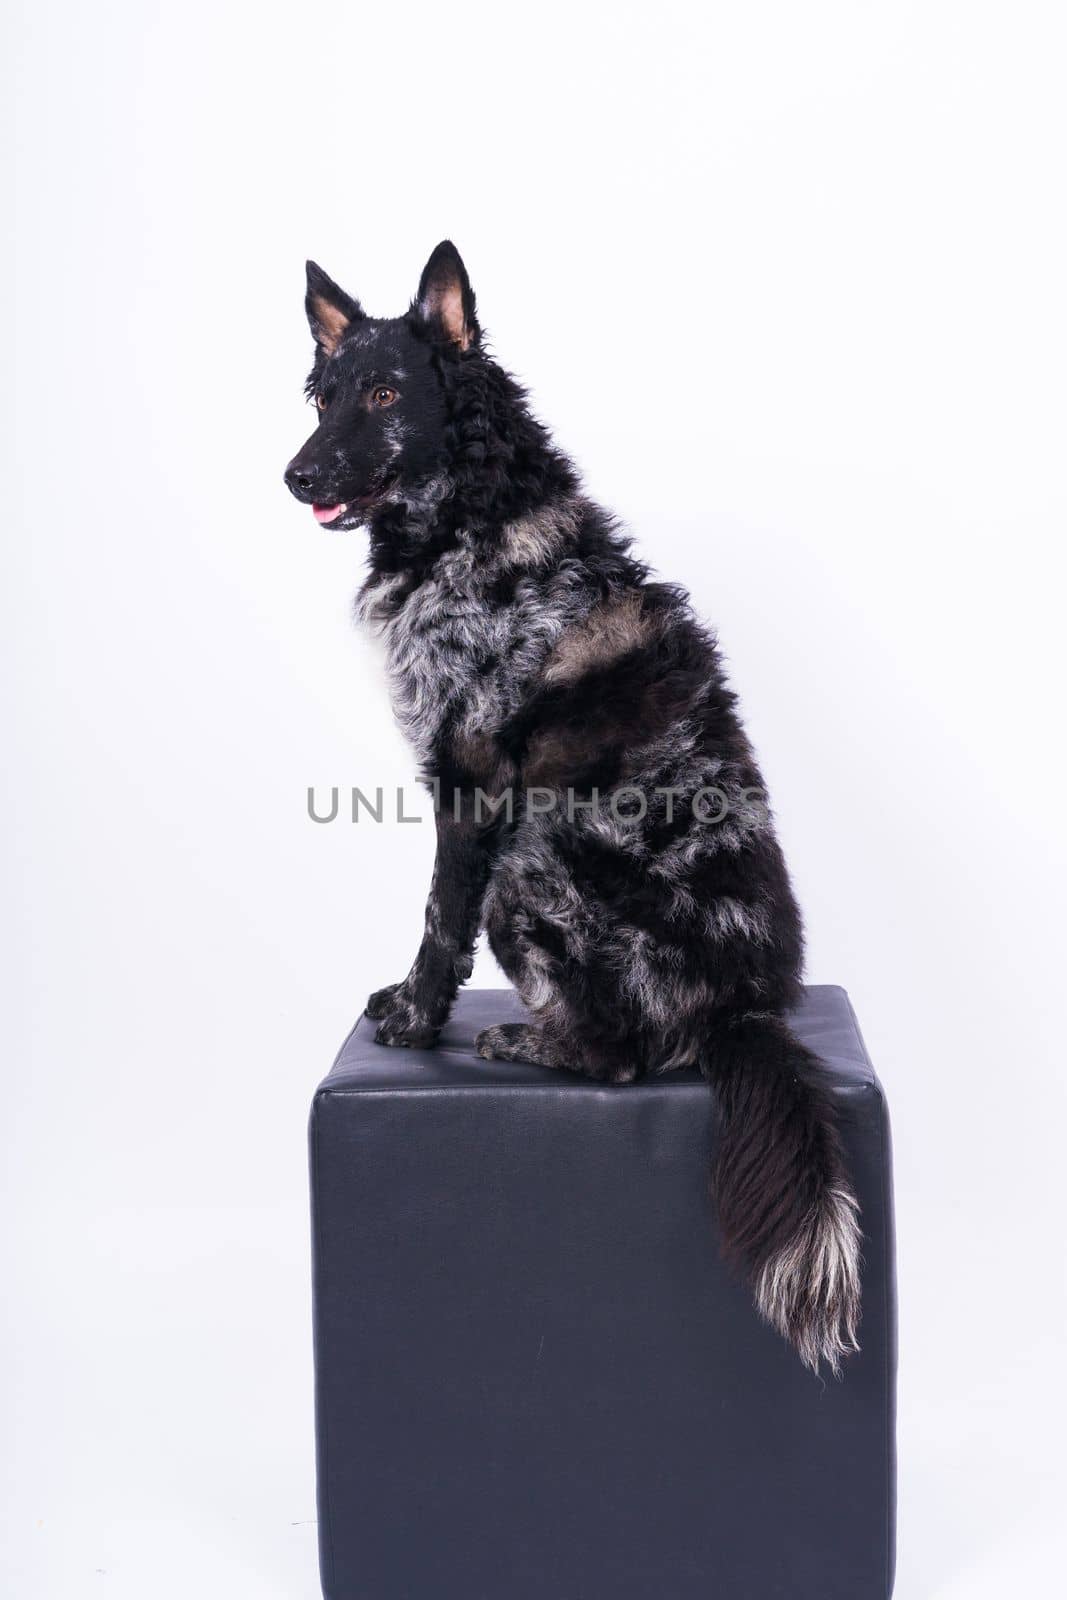 Mudi shepherd in front of a white background studio and interior photo